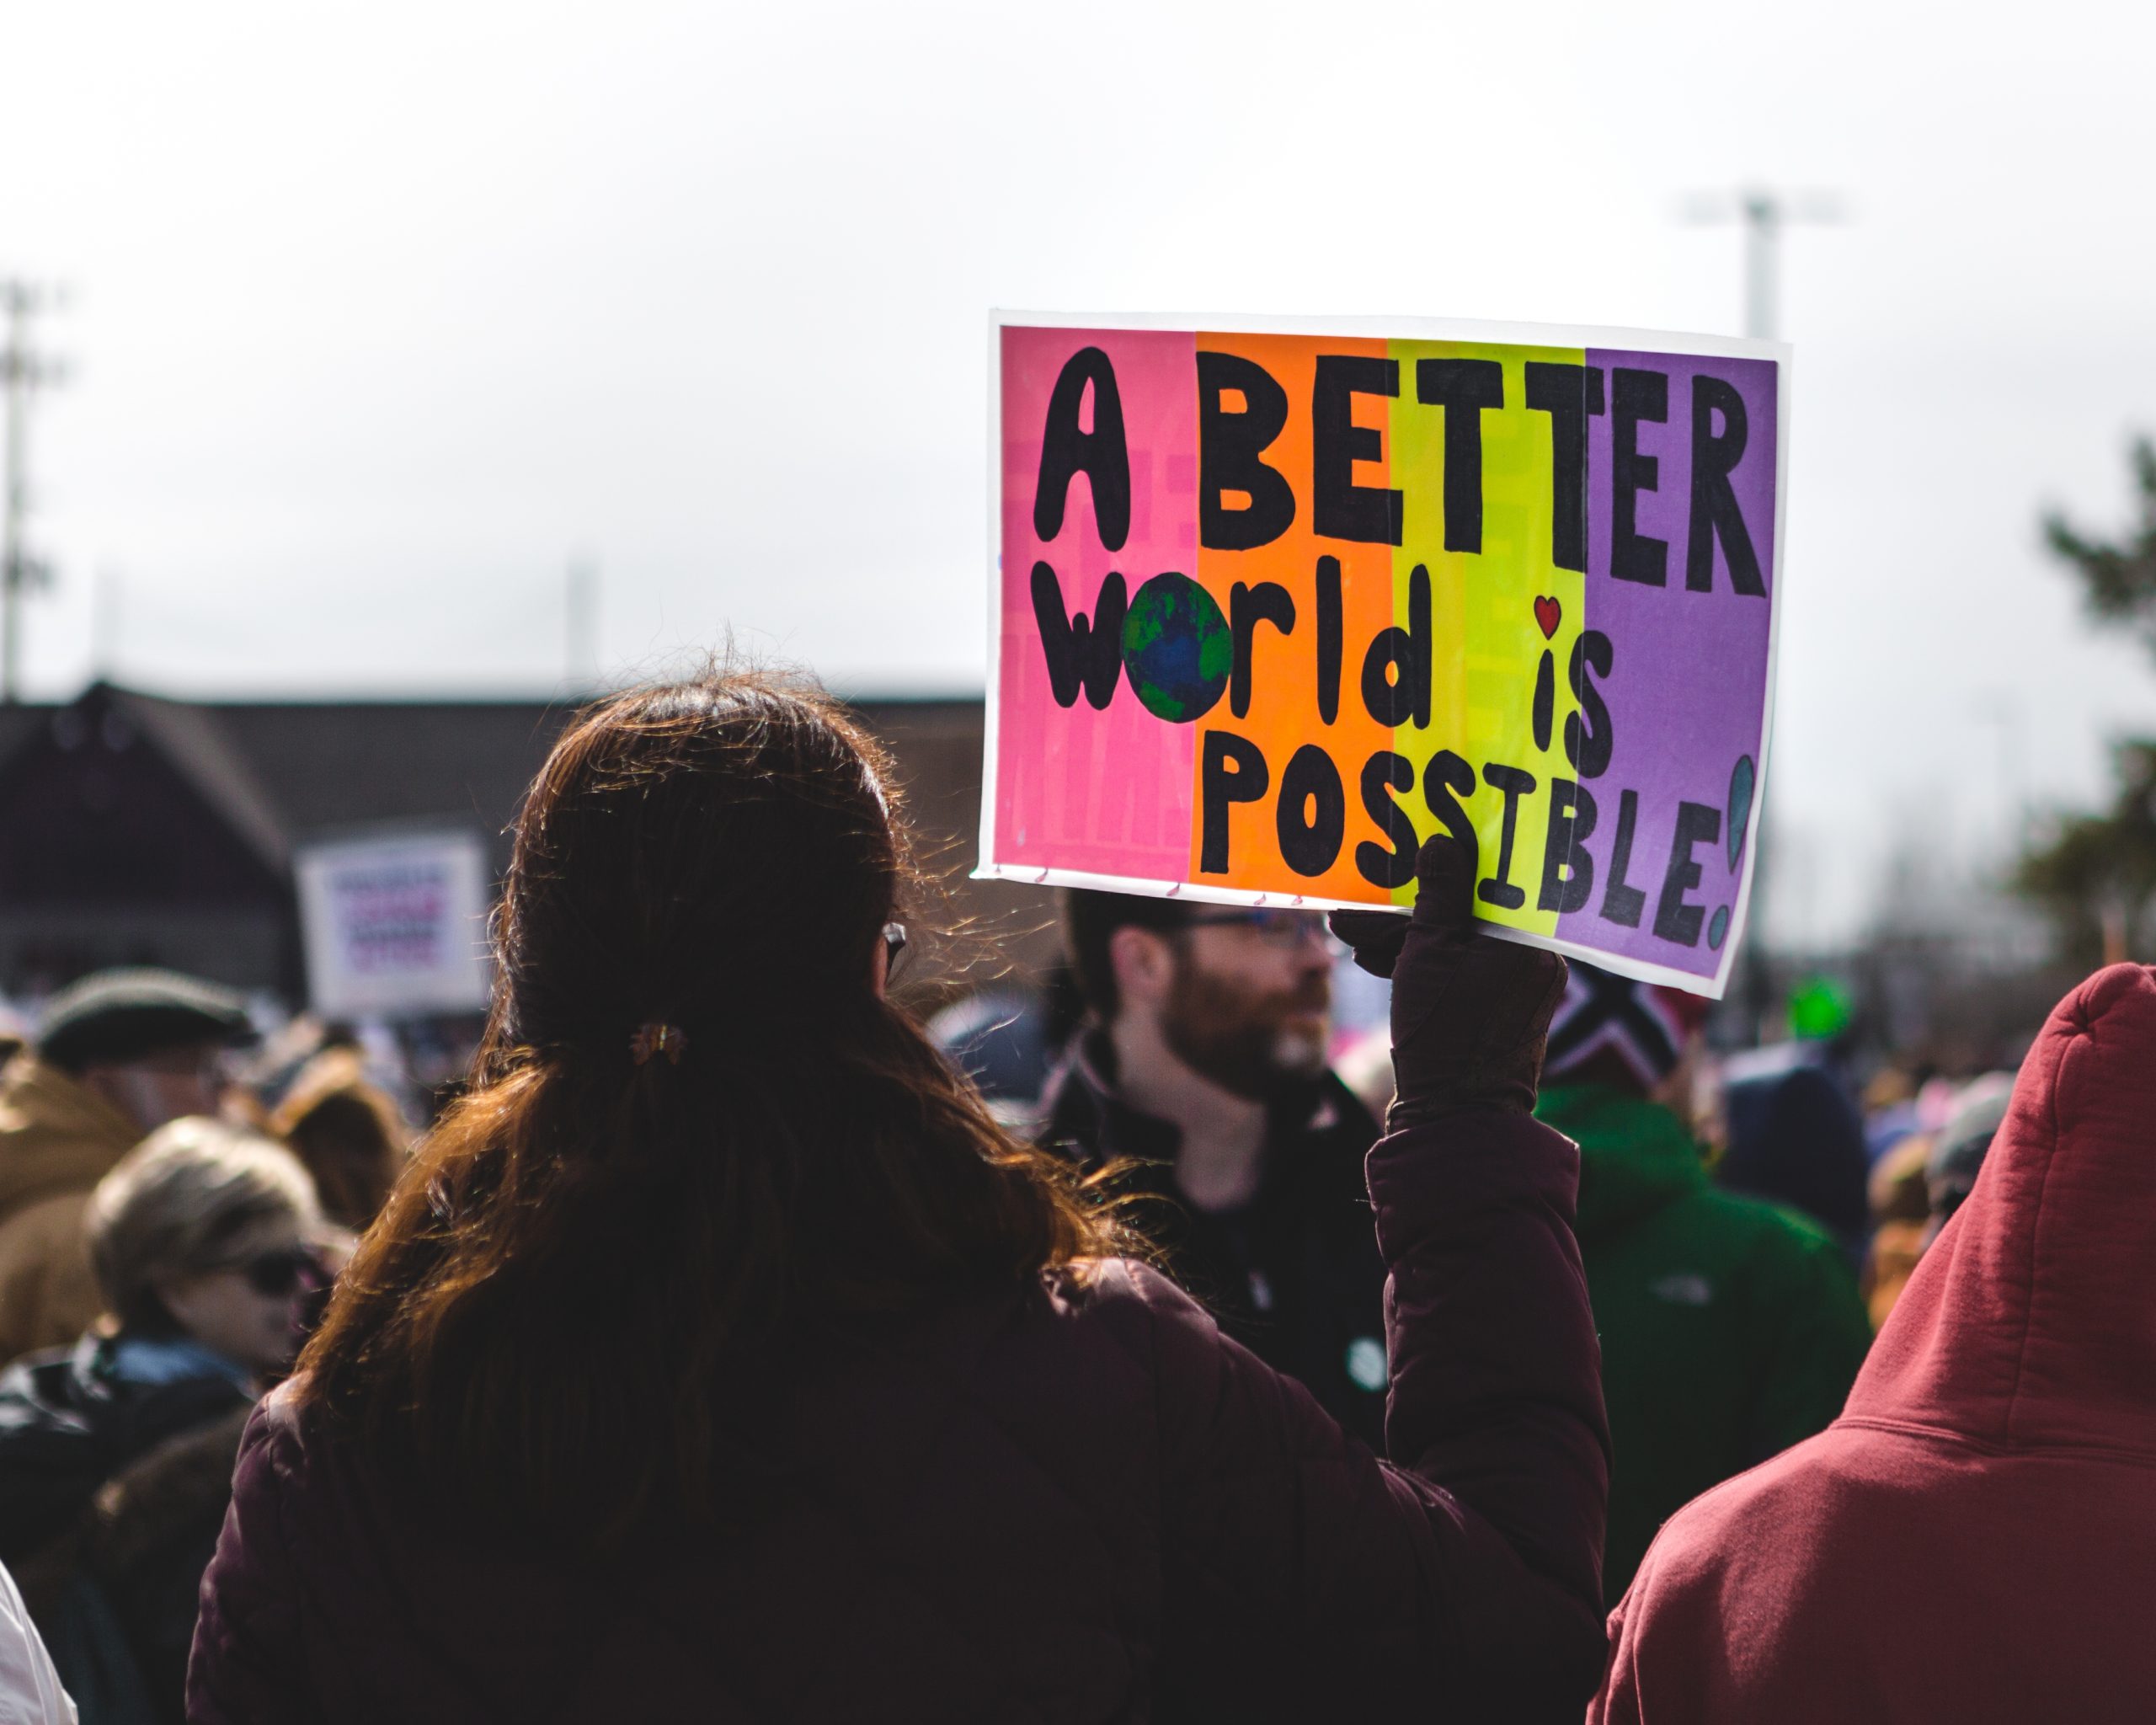 image at protest with person holding sign that says "a better world is possible"